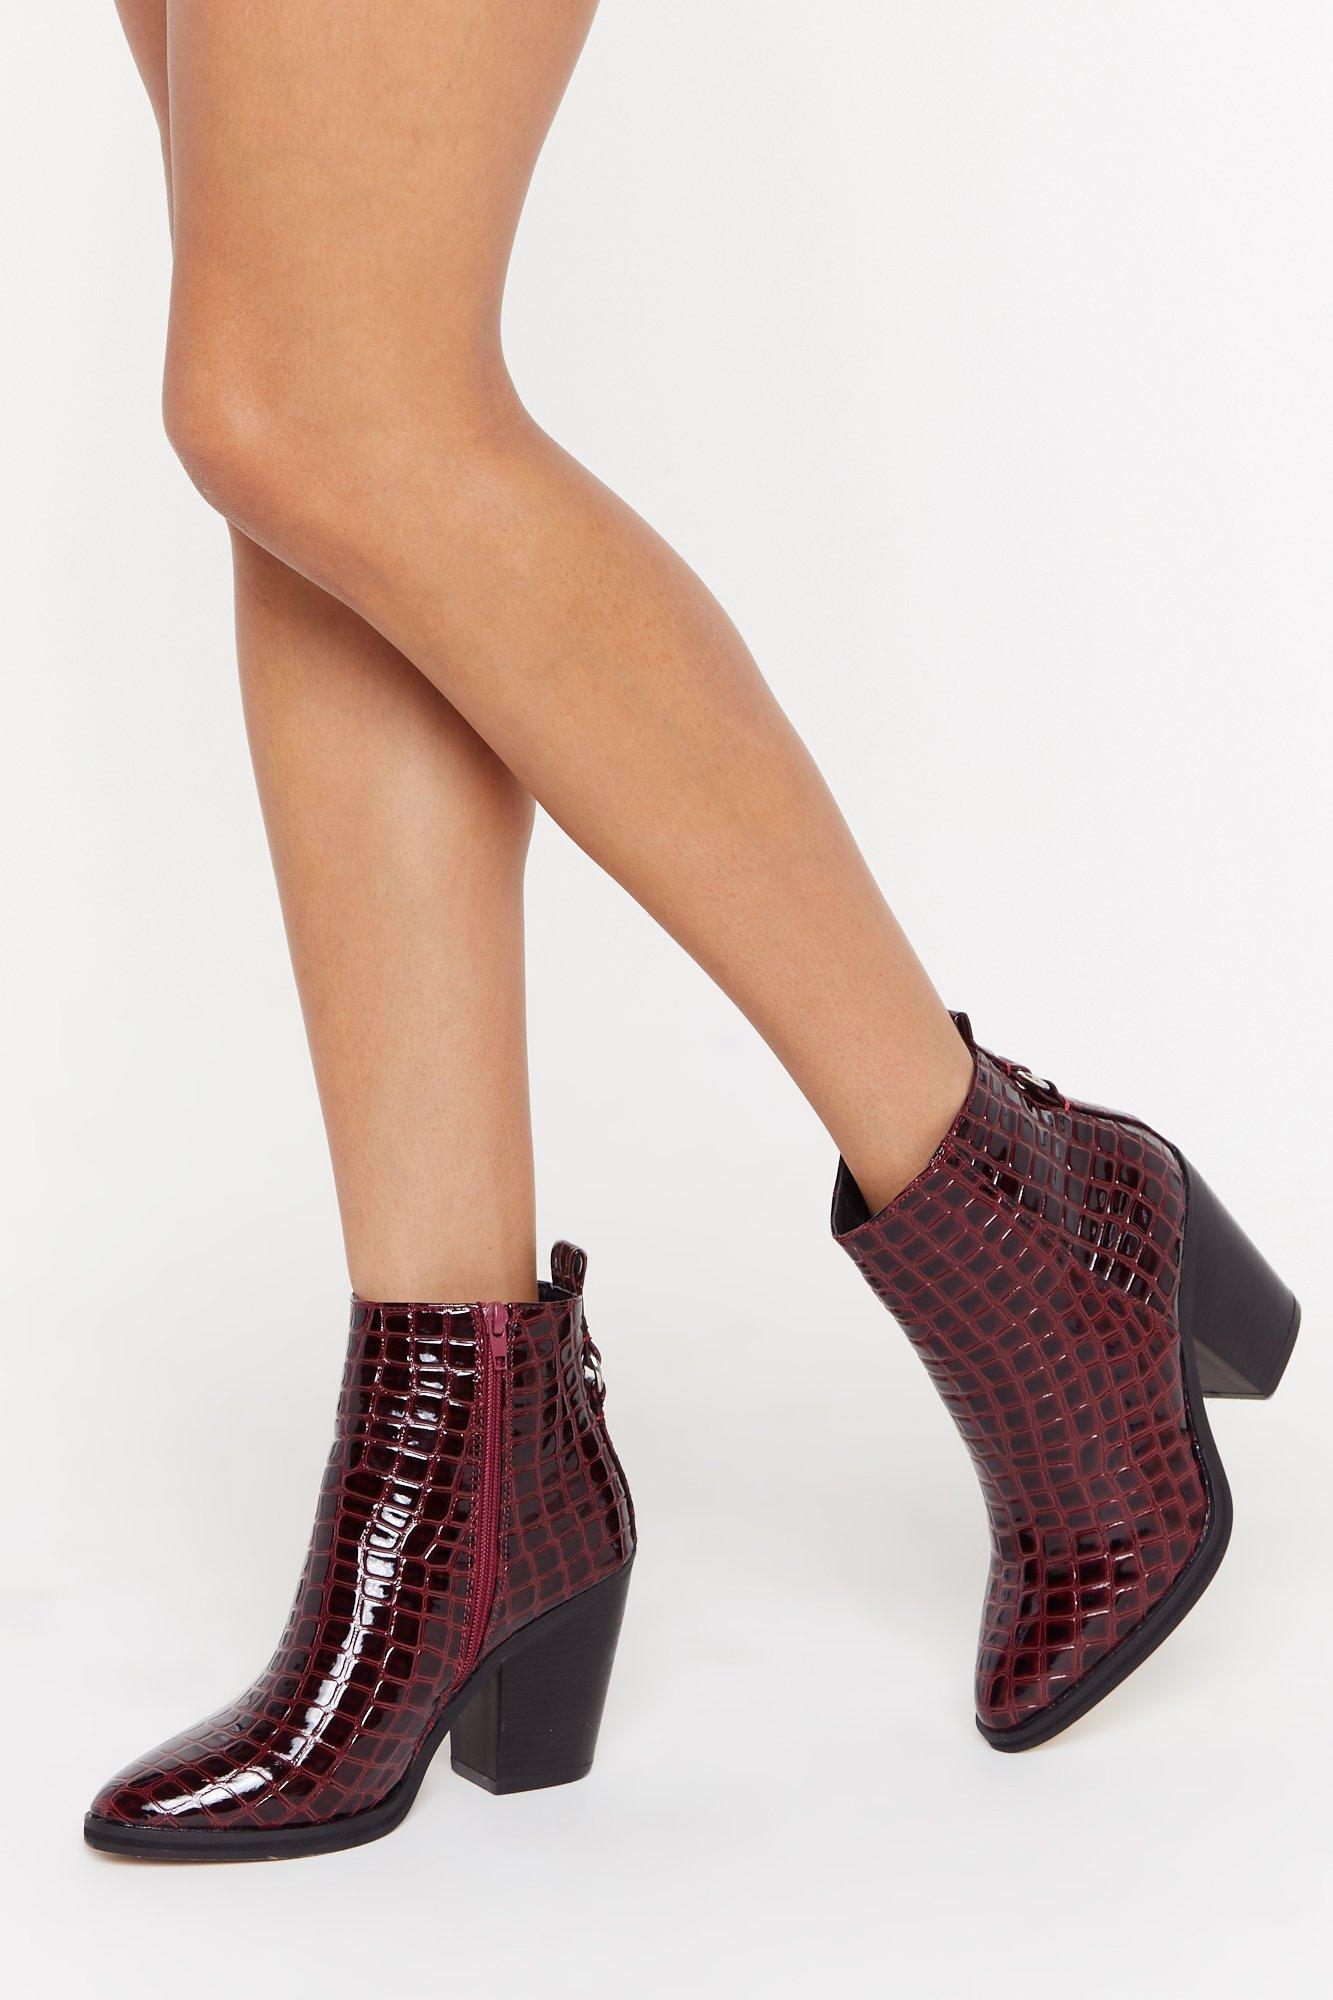 New Shoes | Buy the Latest Shoes & Footwear Online | Nasty Gal